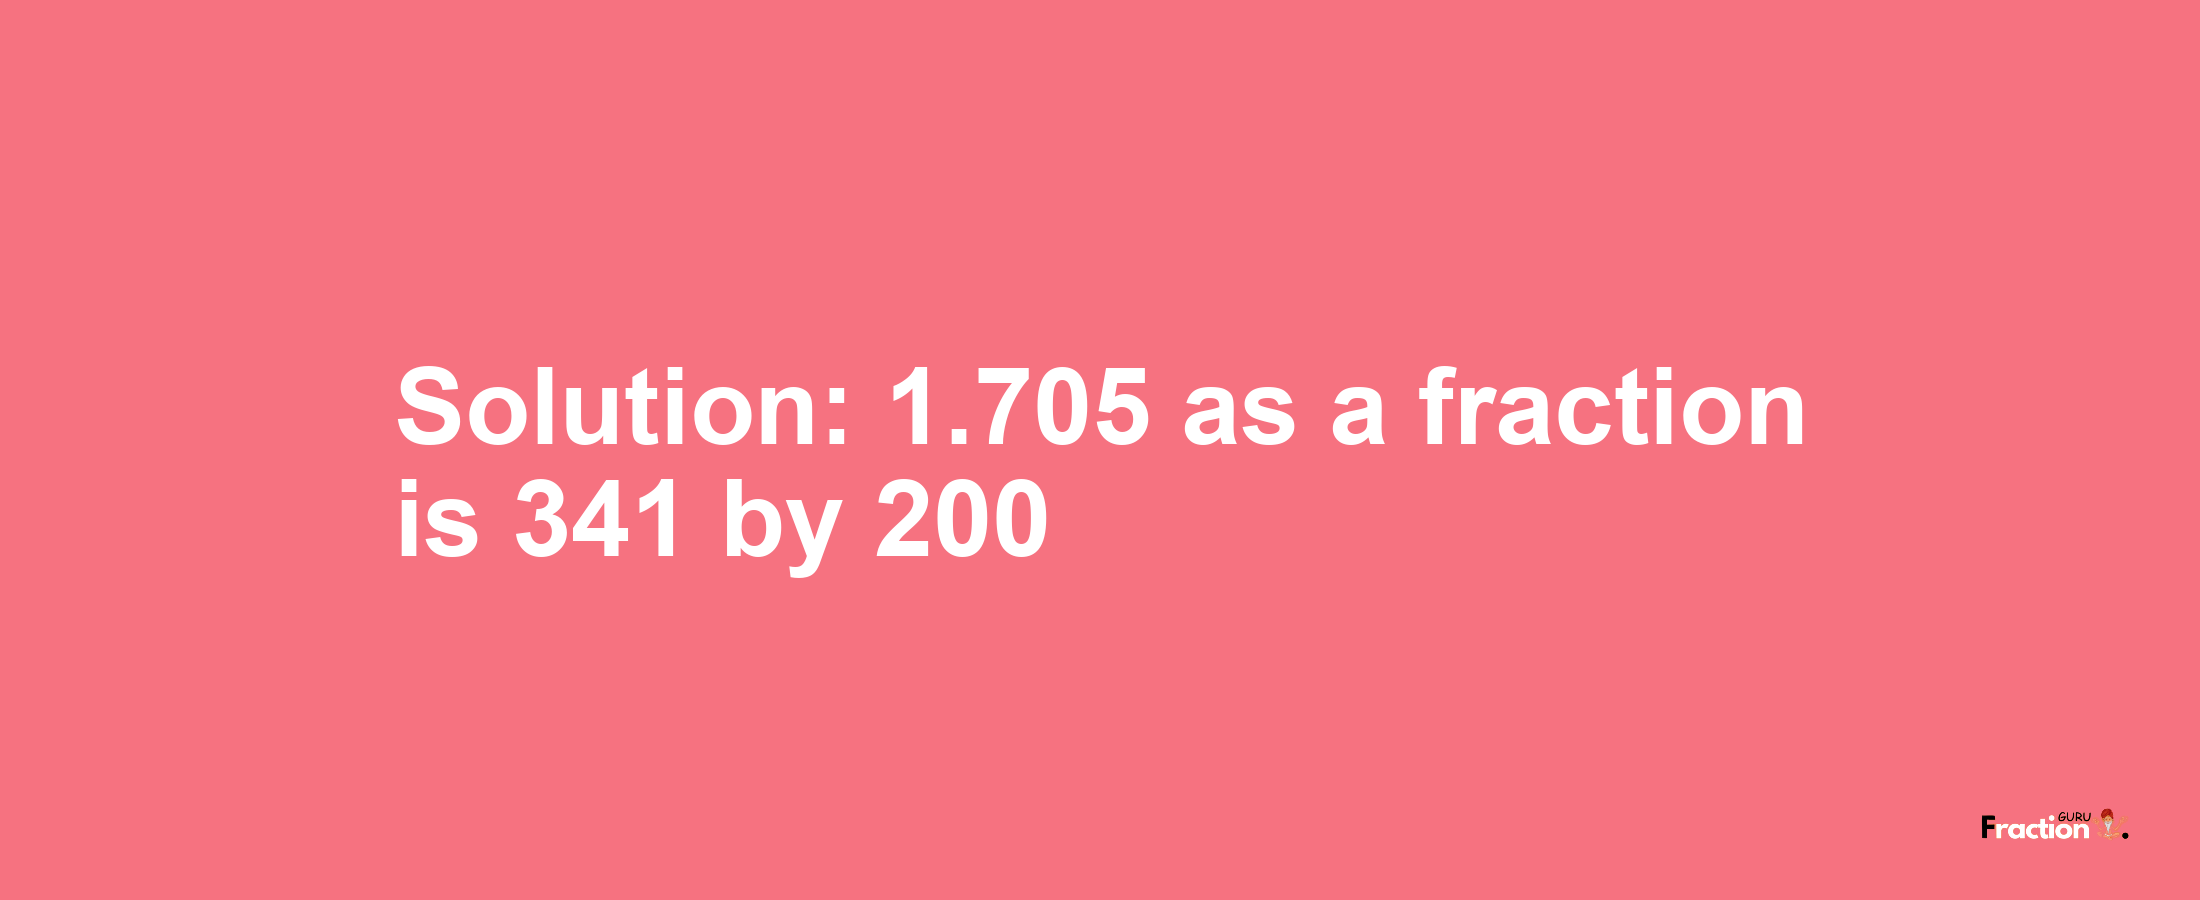 Solution:1.705 as a fraction is 341/200